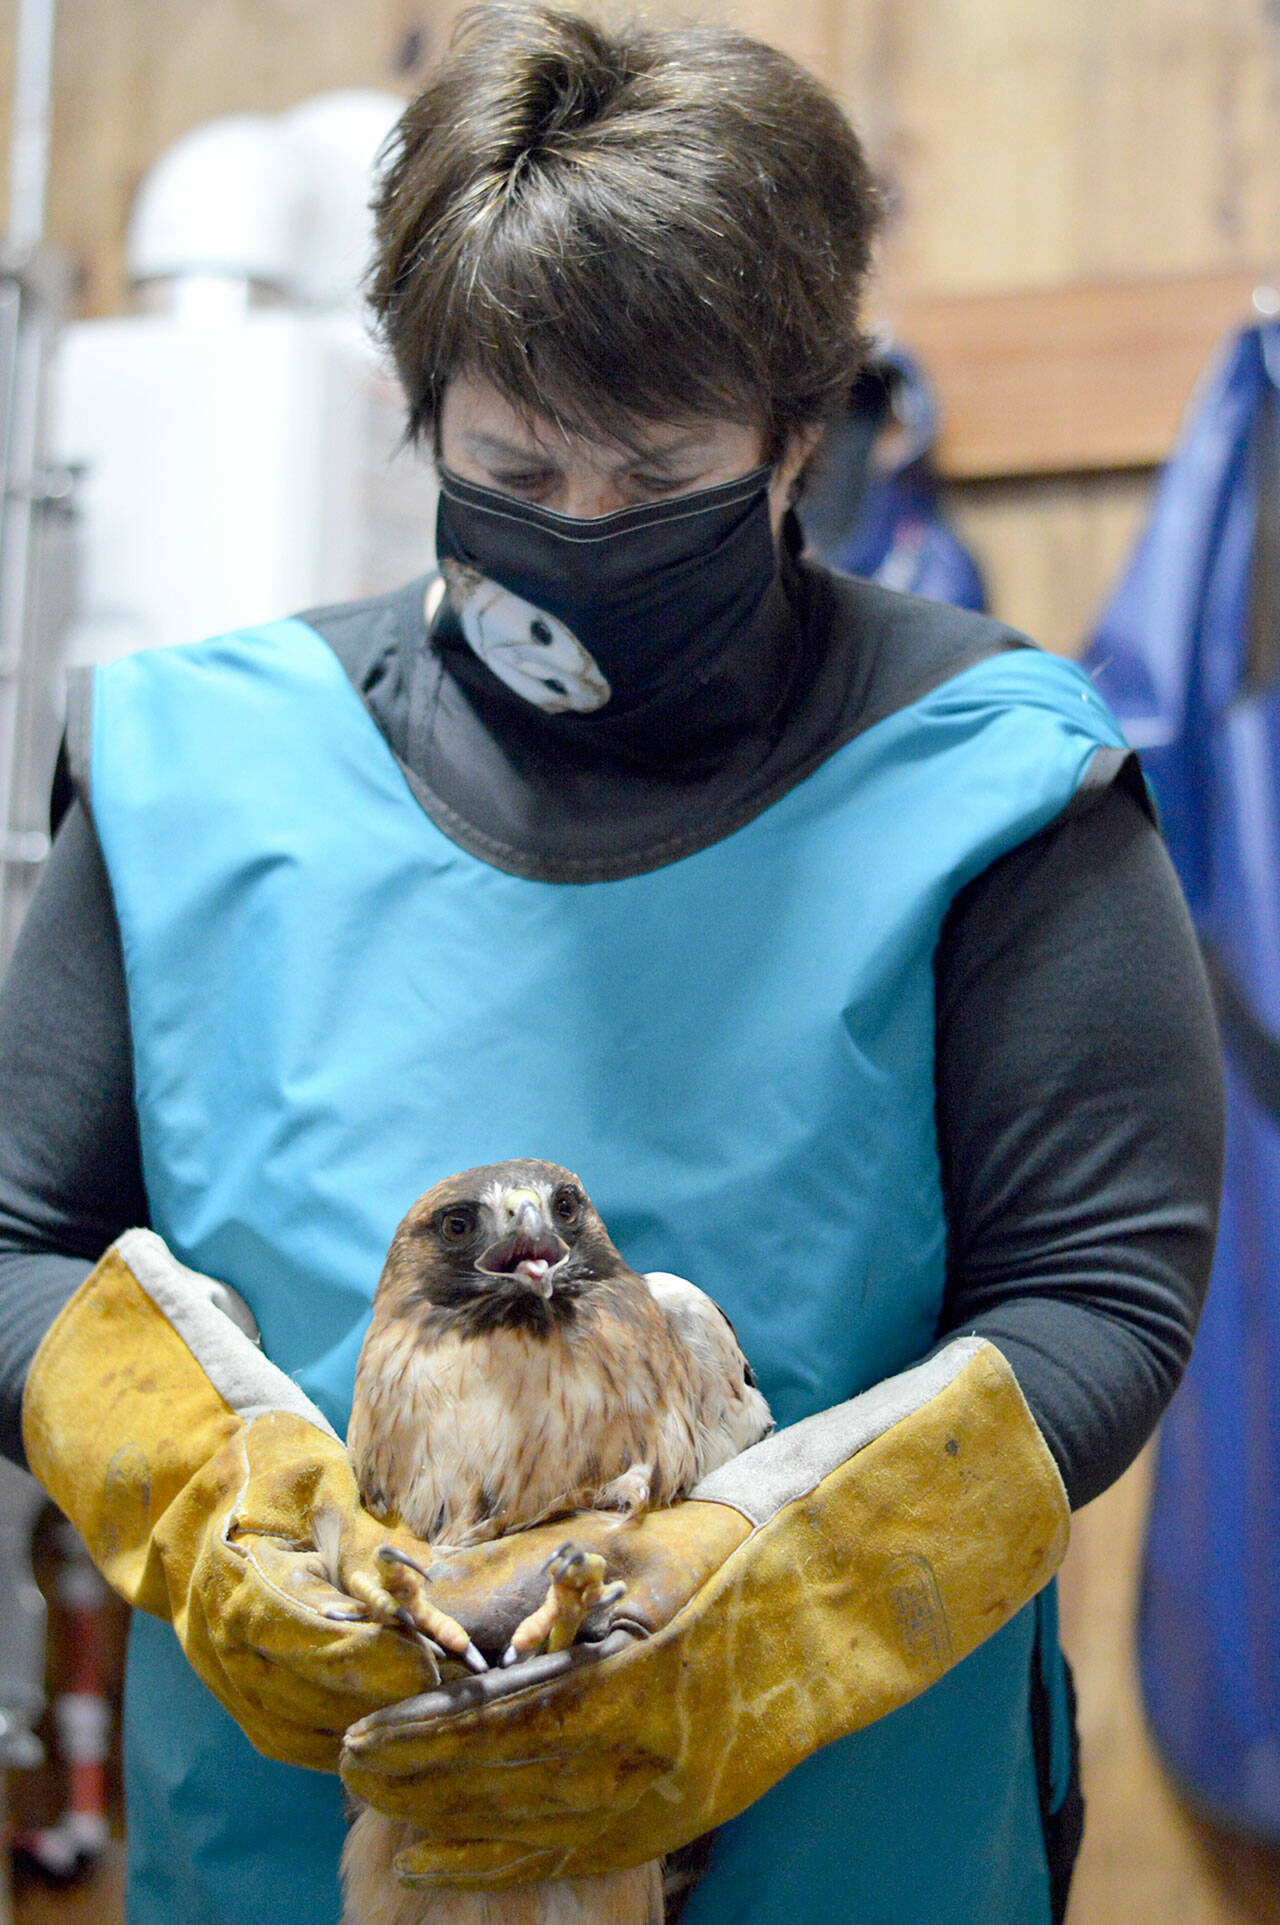 Cynthia Daily cradles an injured red-tailed hawk, one of the patients at Discovery Bay Wild Bird Rescue. Birds from across the North Olympic Peninsula receive care at Daily’s avian hospital in Port Townsend. (Diane Urbani de la Paz/Peninsula Daily News)